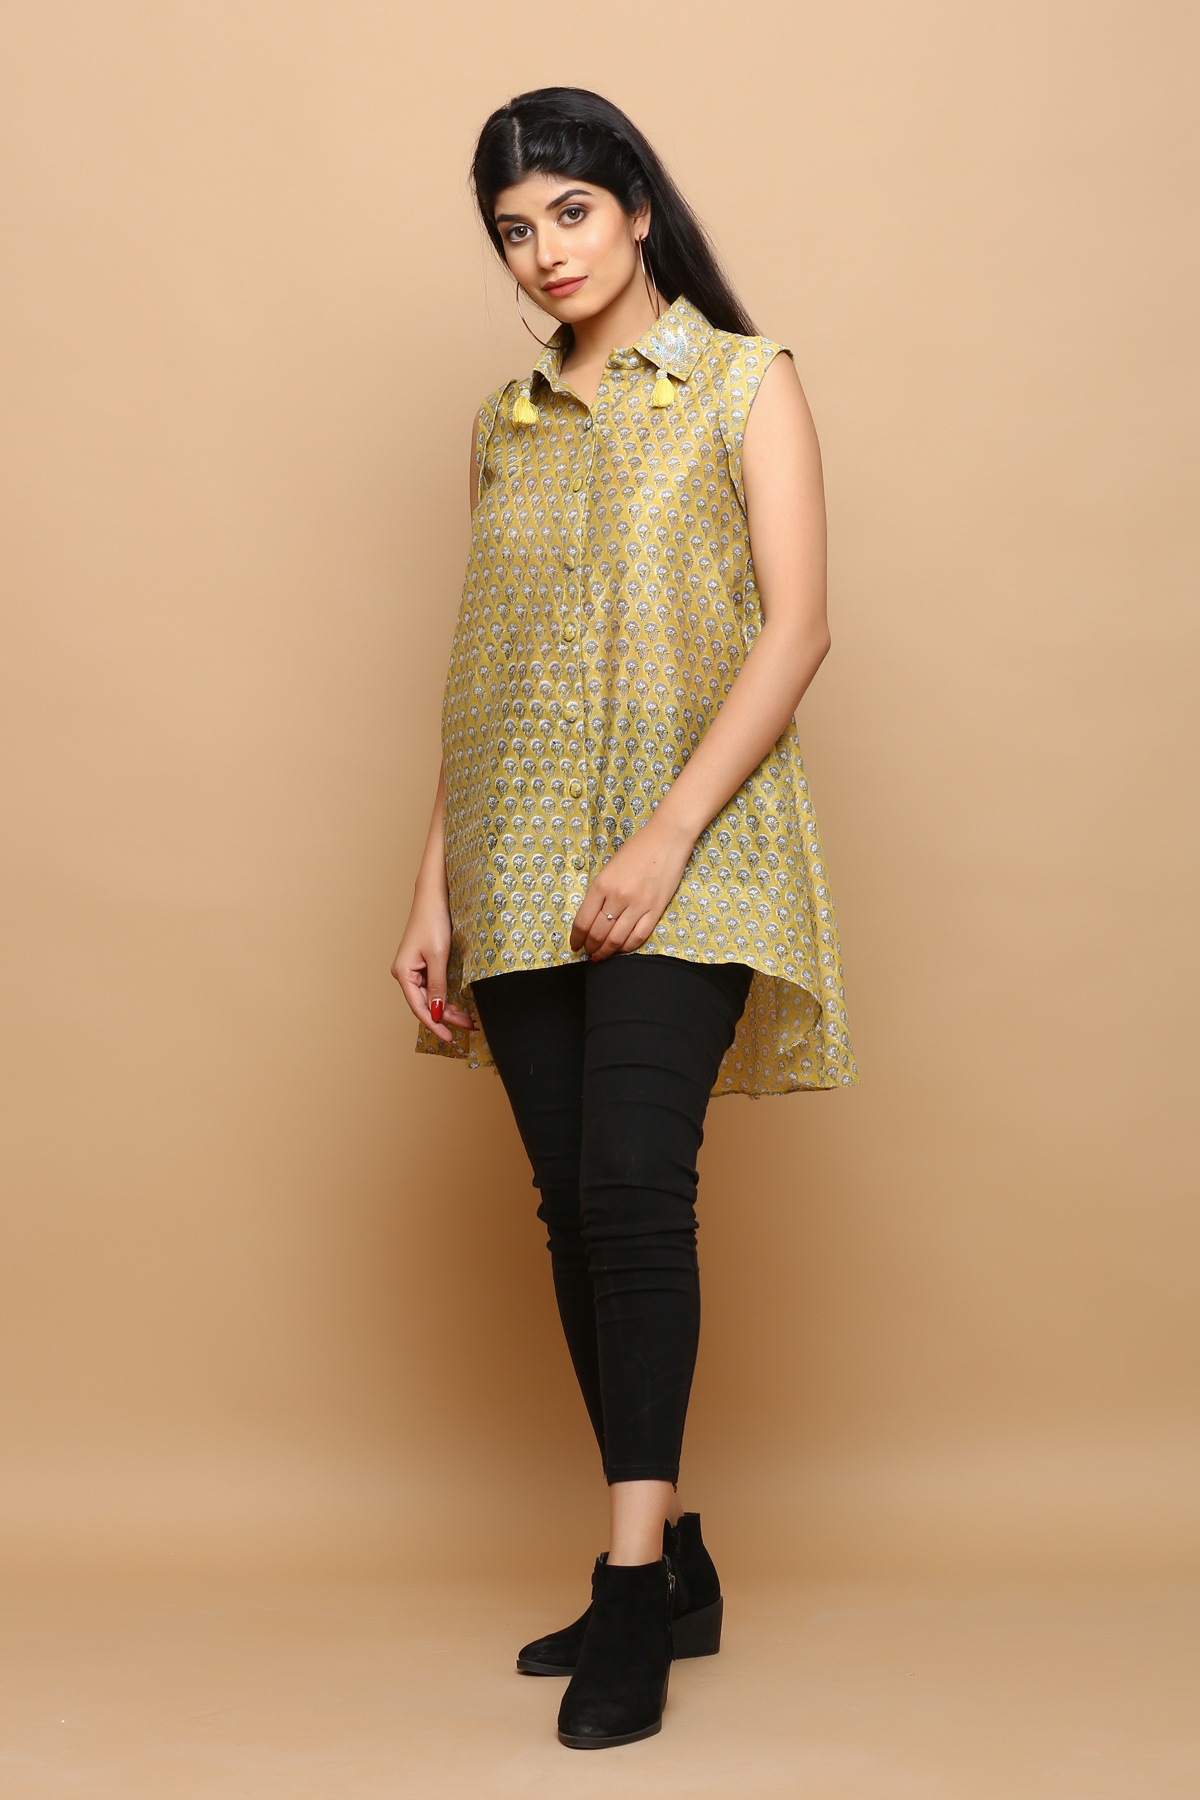 Chanderi a- symetrical top with hand work detailing on the collar